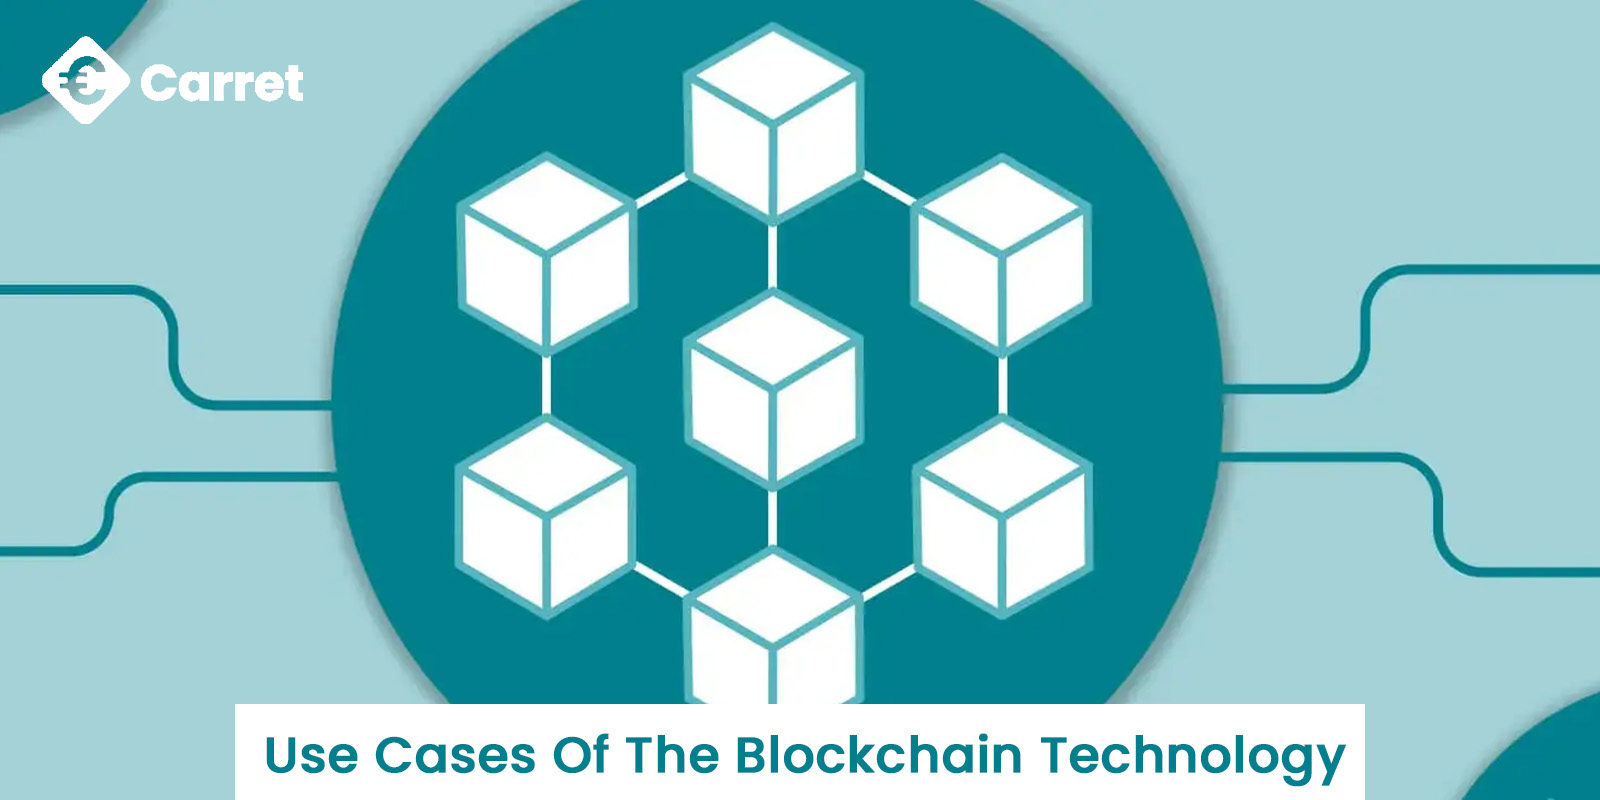 7 Use Cases Of The Blockchain Technology You Should Know